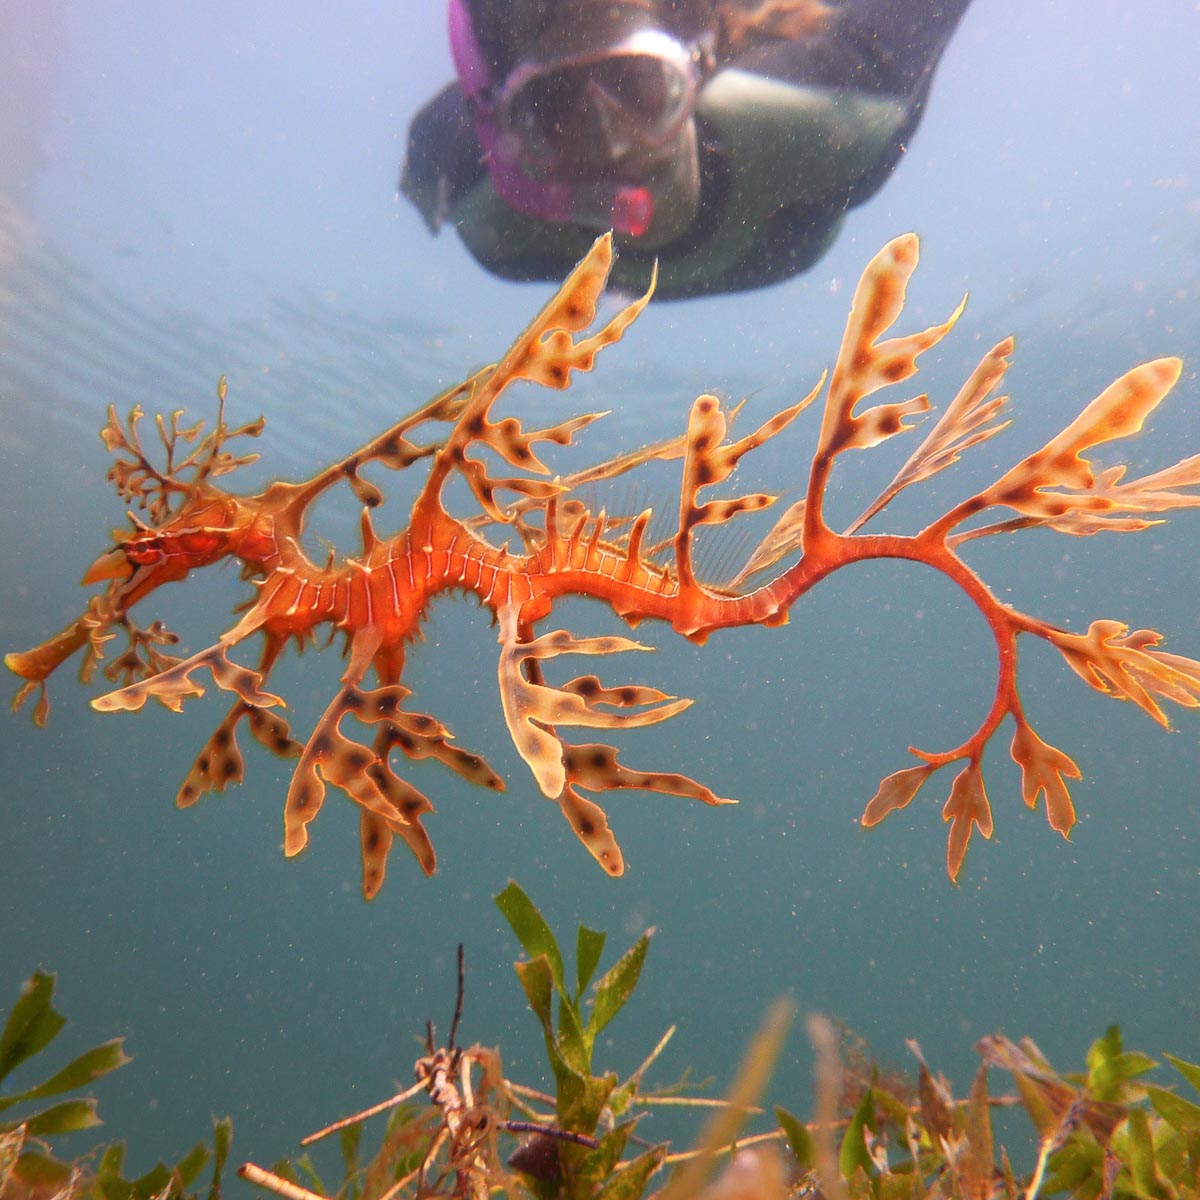 Snorkel with Seadragons to Celebrate Festival of Nature - 4th December